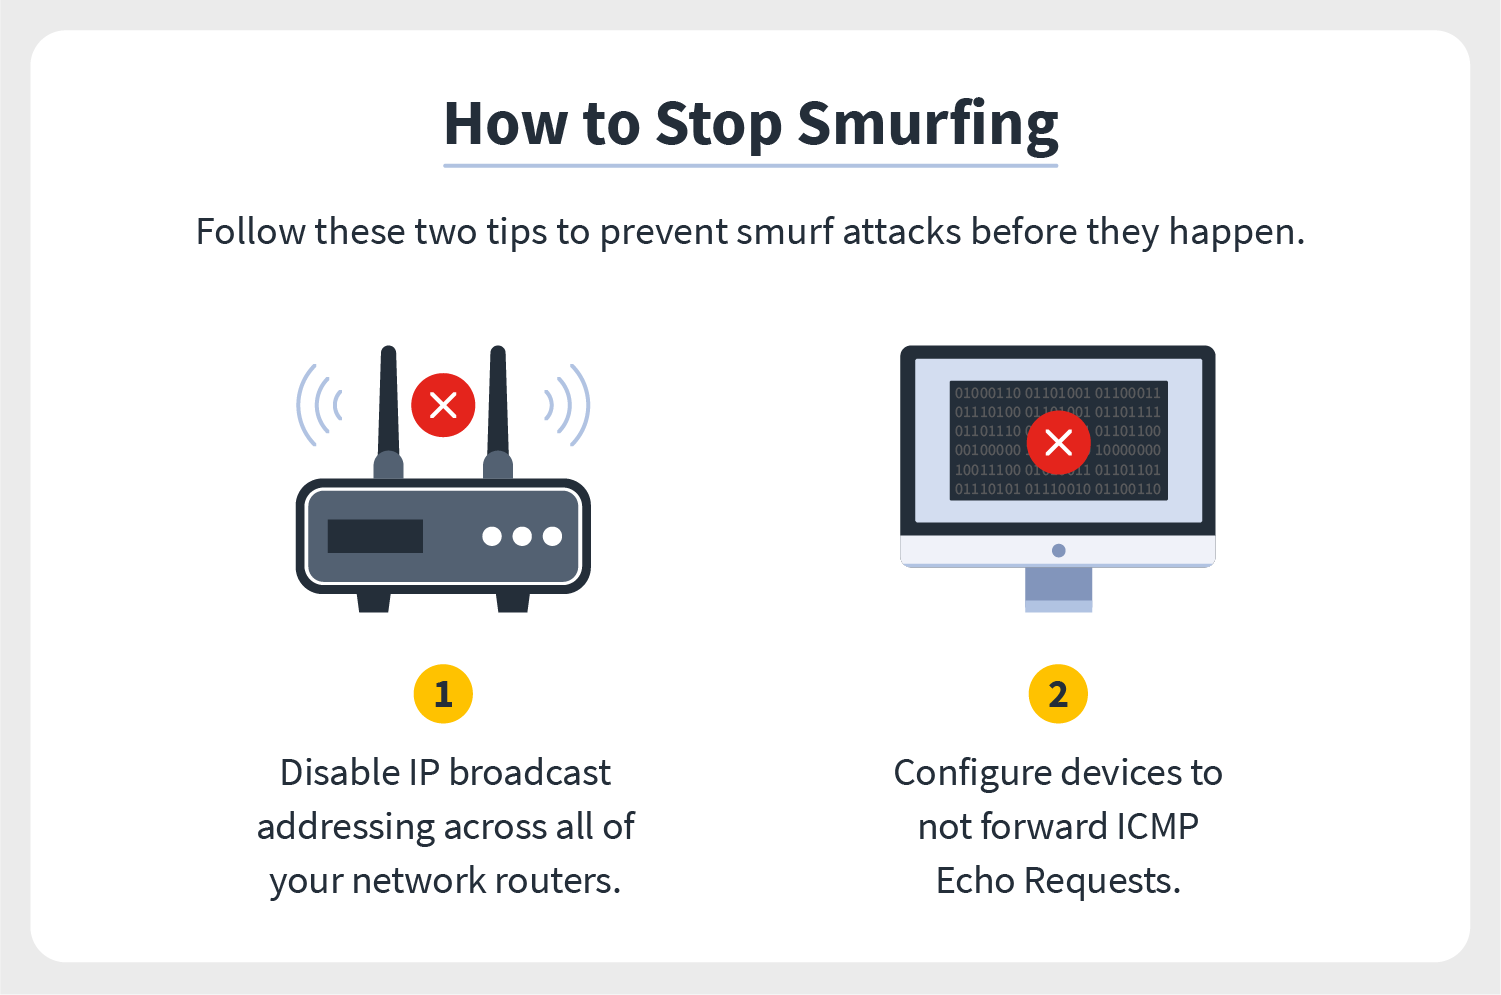 a router and a computer screen are associated with two tips to prevent smurf attacks